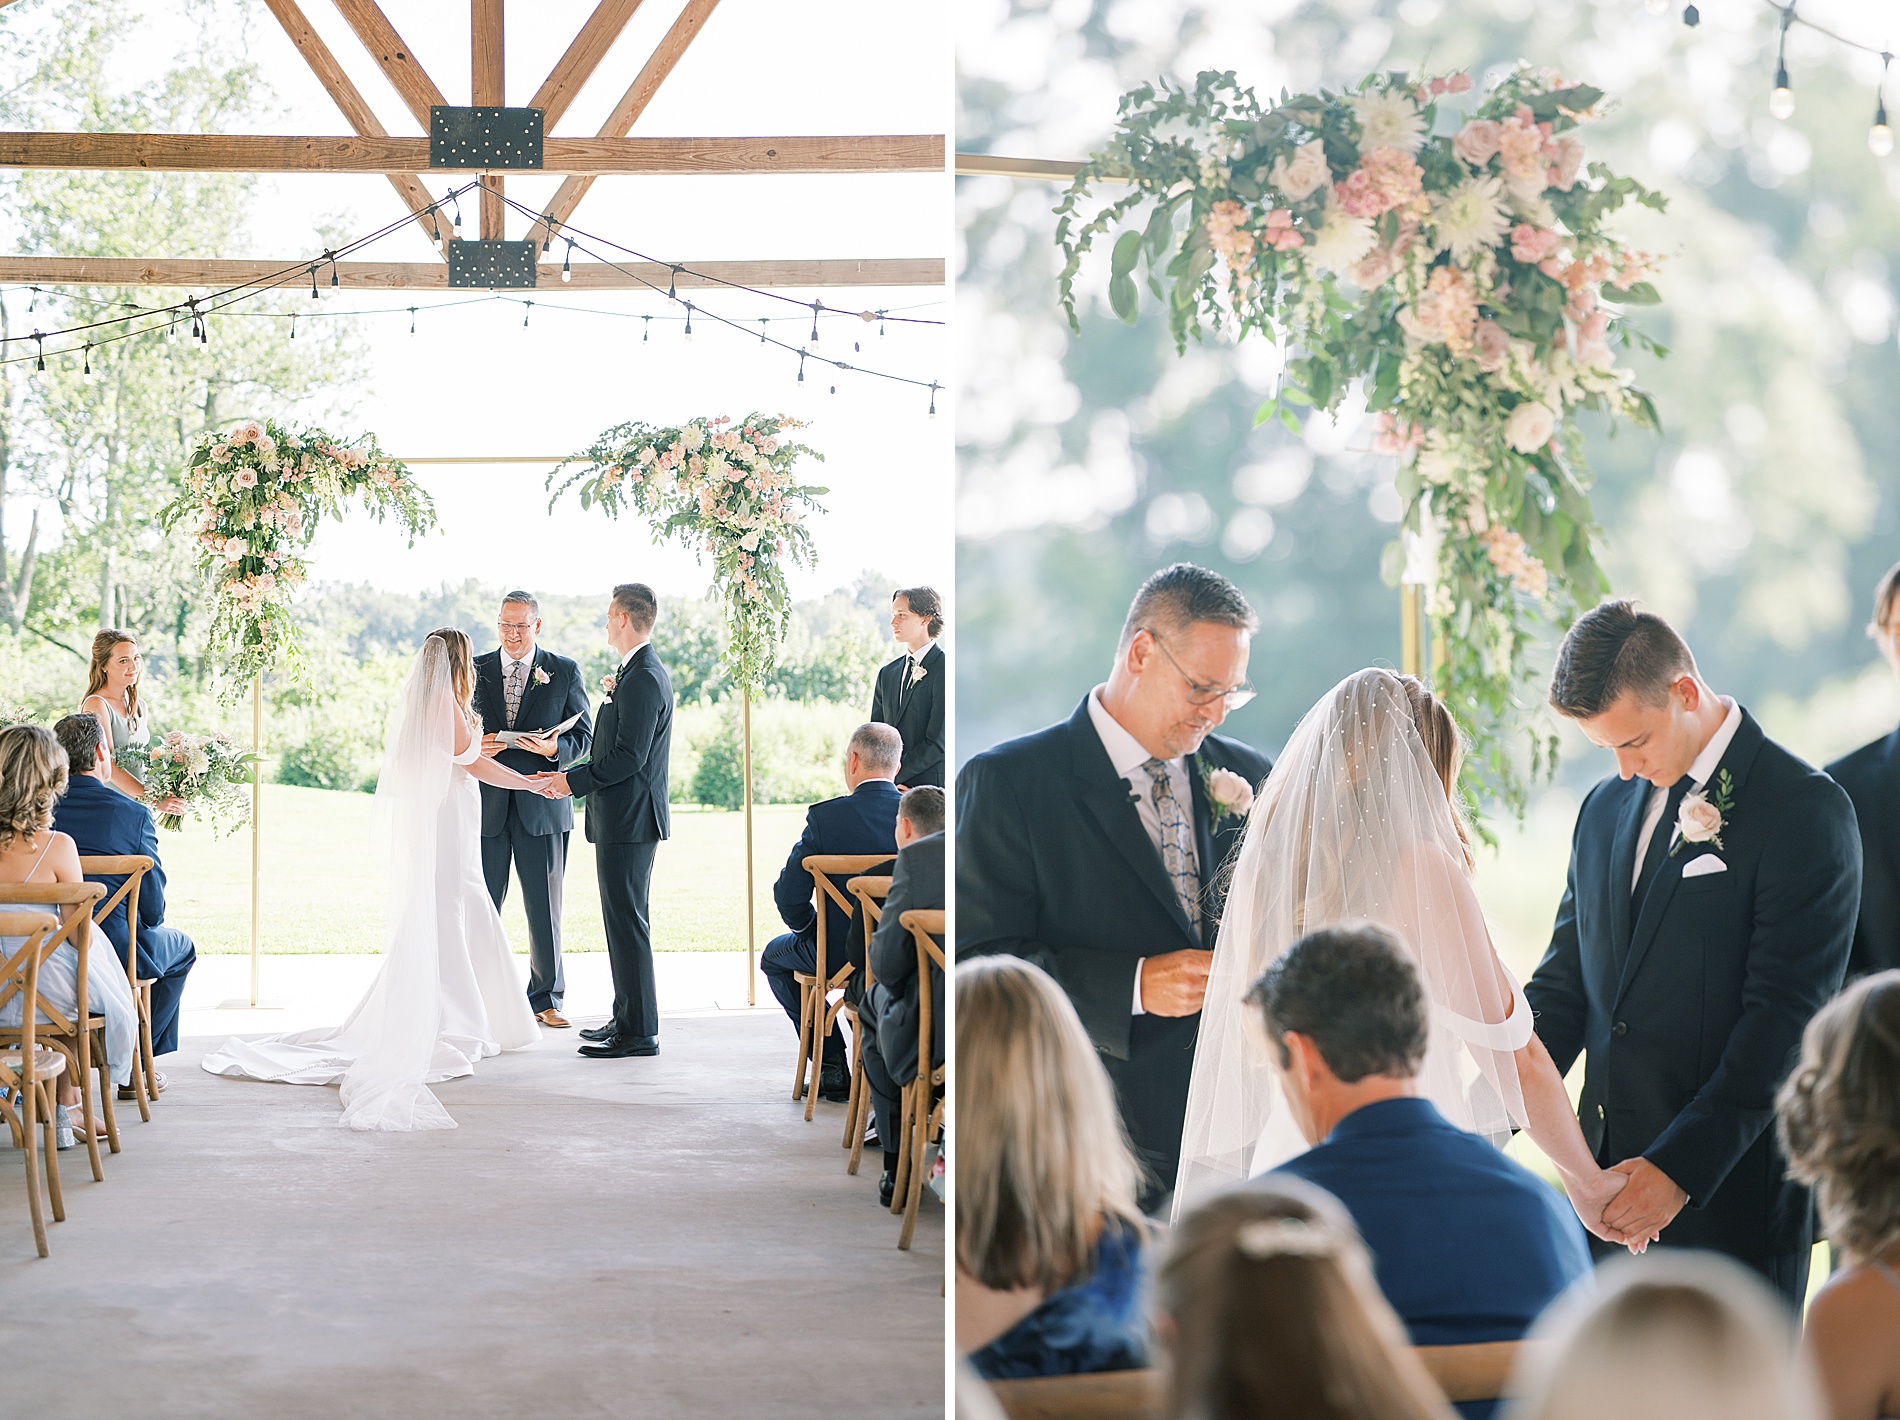 Southern Harvest Hollow Wedding ceremony